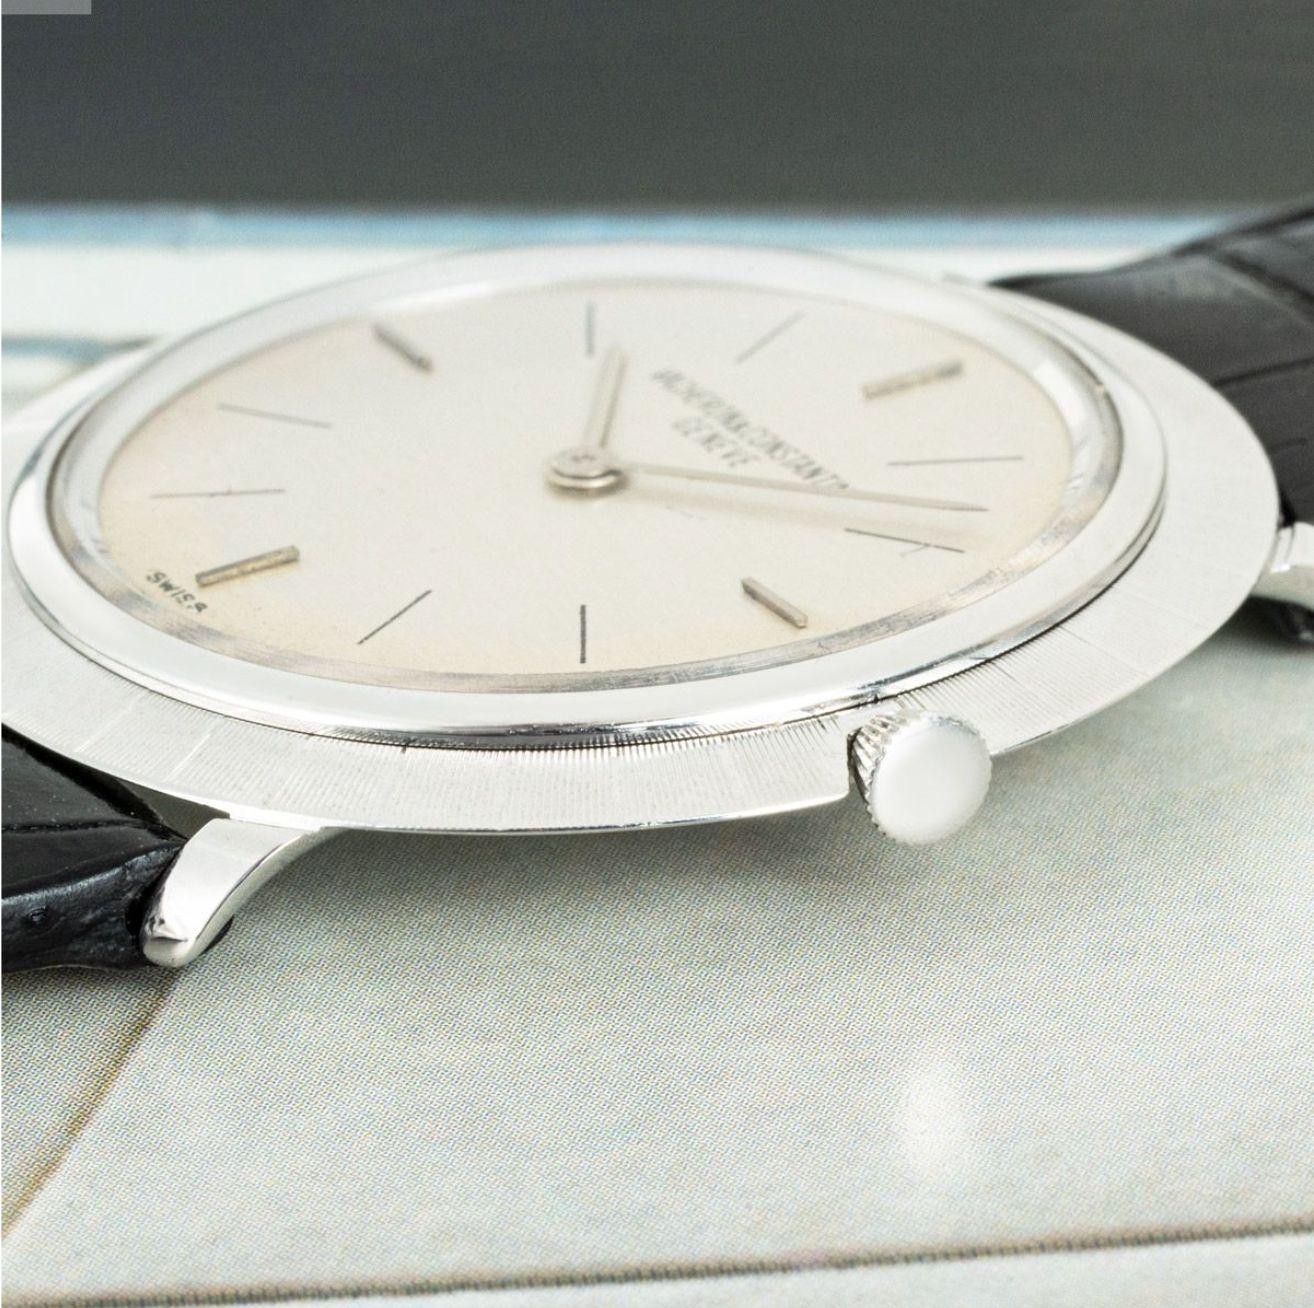 An Ultra Thin 33mm Vacheron Constantin crafted in white gold. Featuring a silver dial and a white gold bezel.

Equipped with a black generic leather strap and steel pin buckle. The watch is fitted with a plastic glass and a manual winding